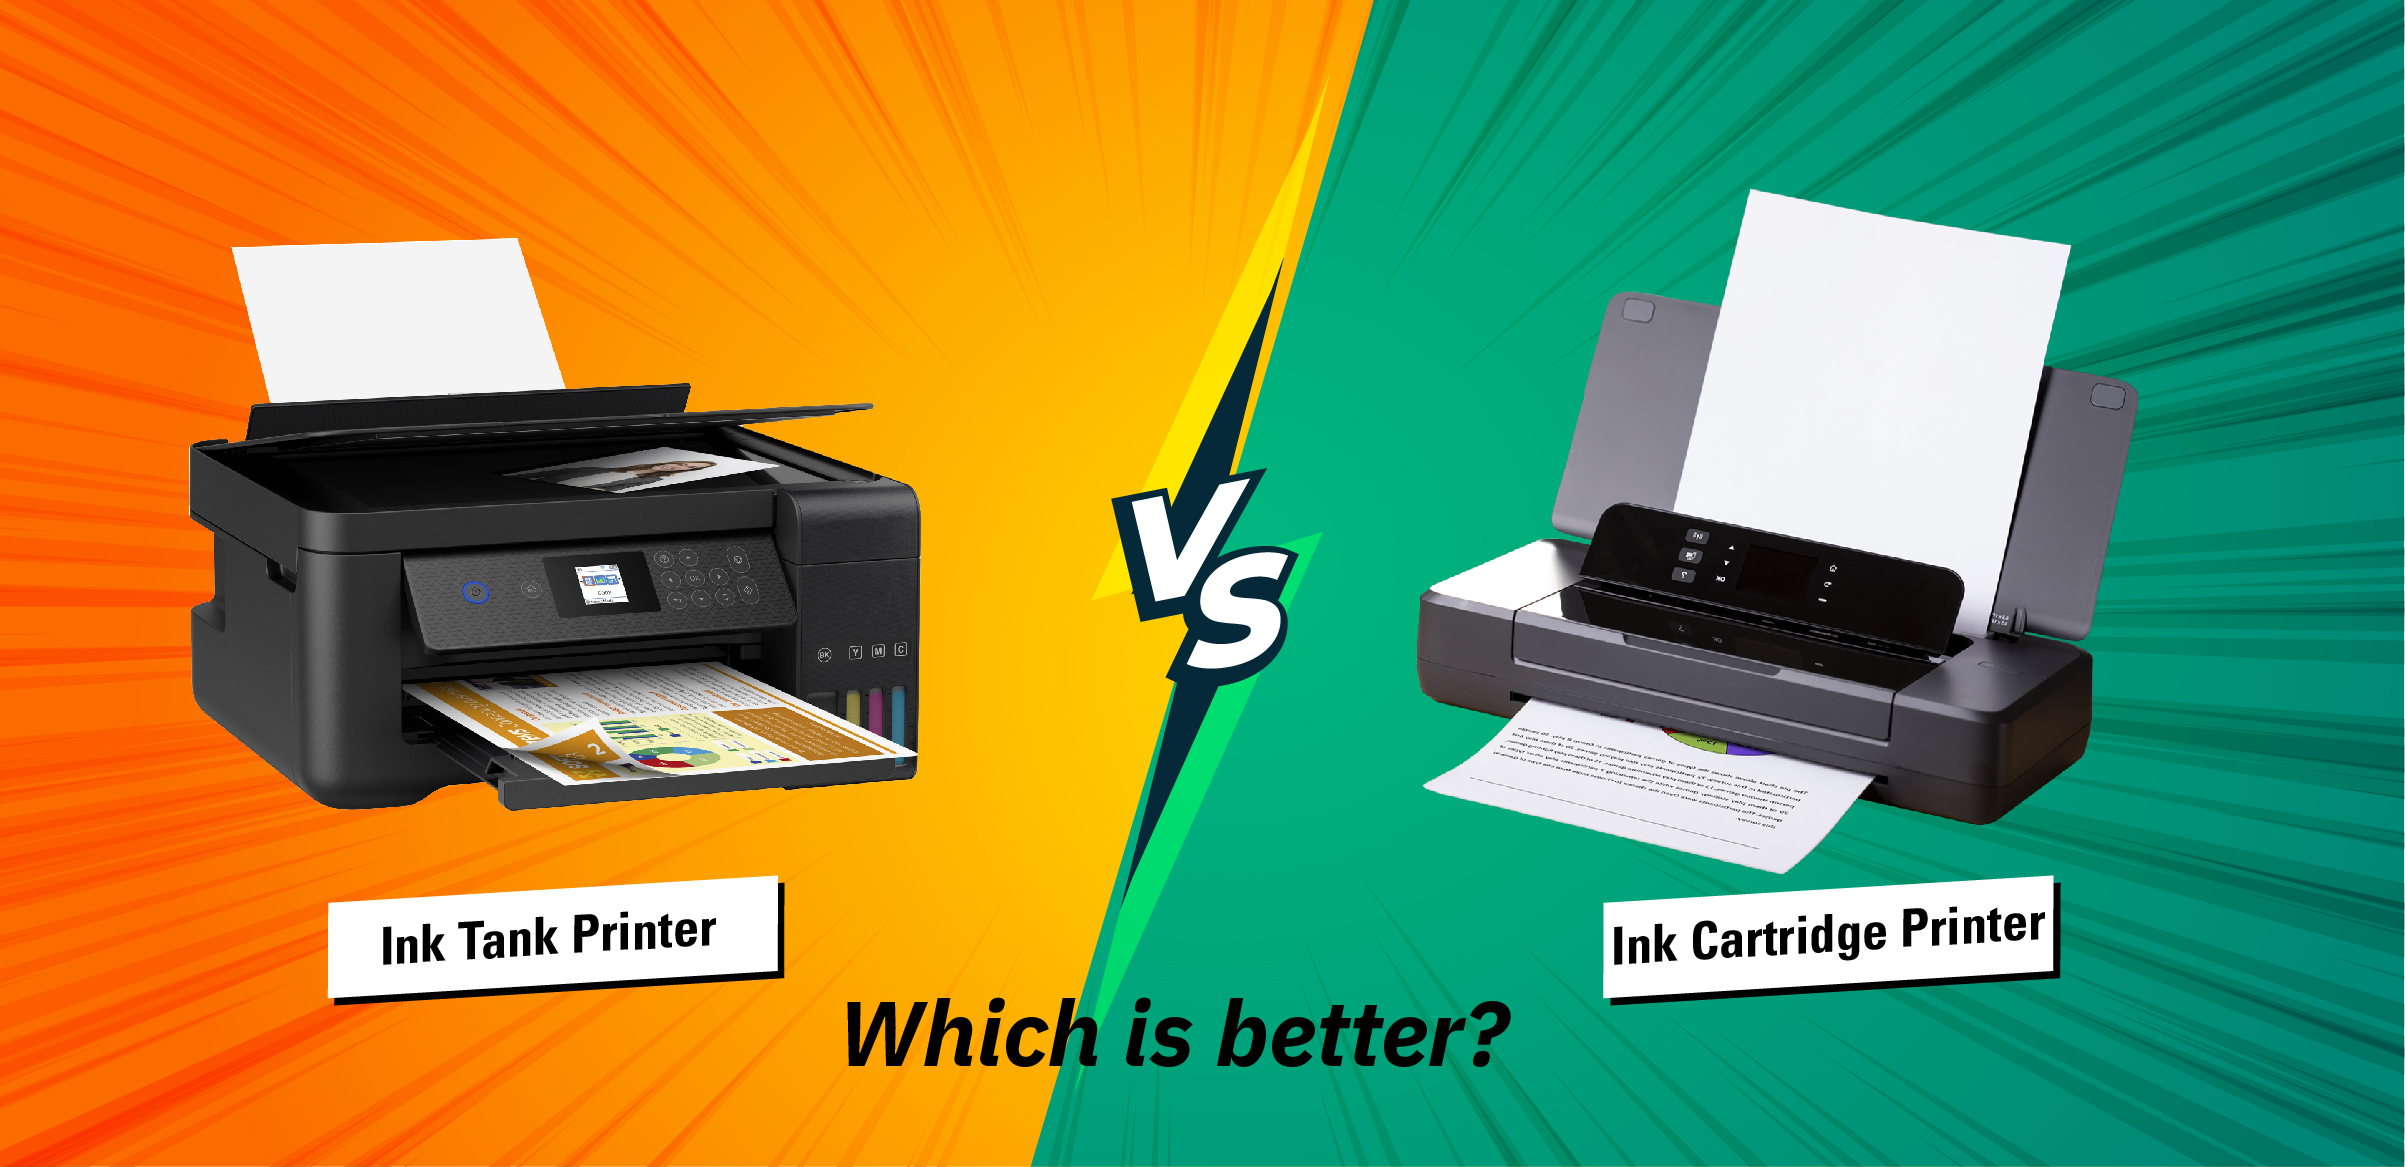 Ink Tank vs. Ink Cartridge Printers: Which Is Better?